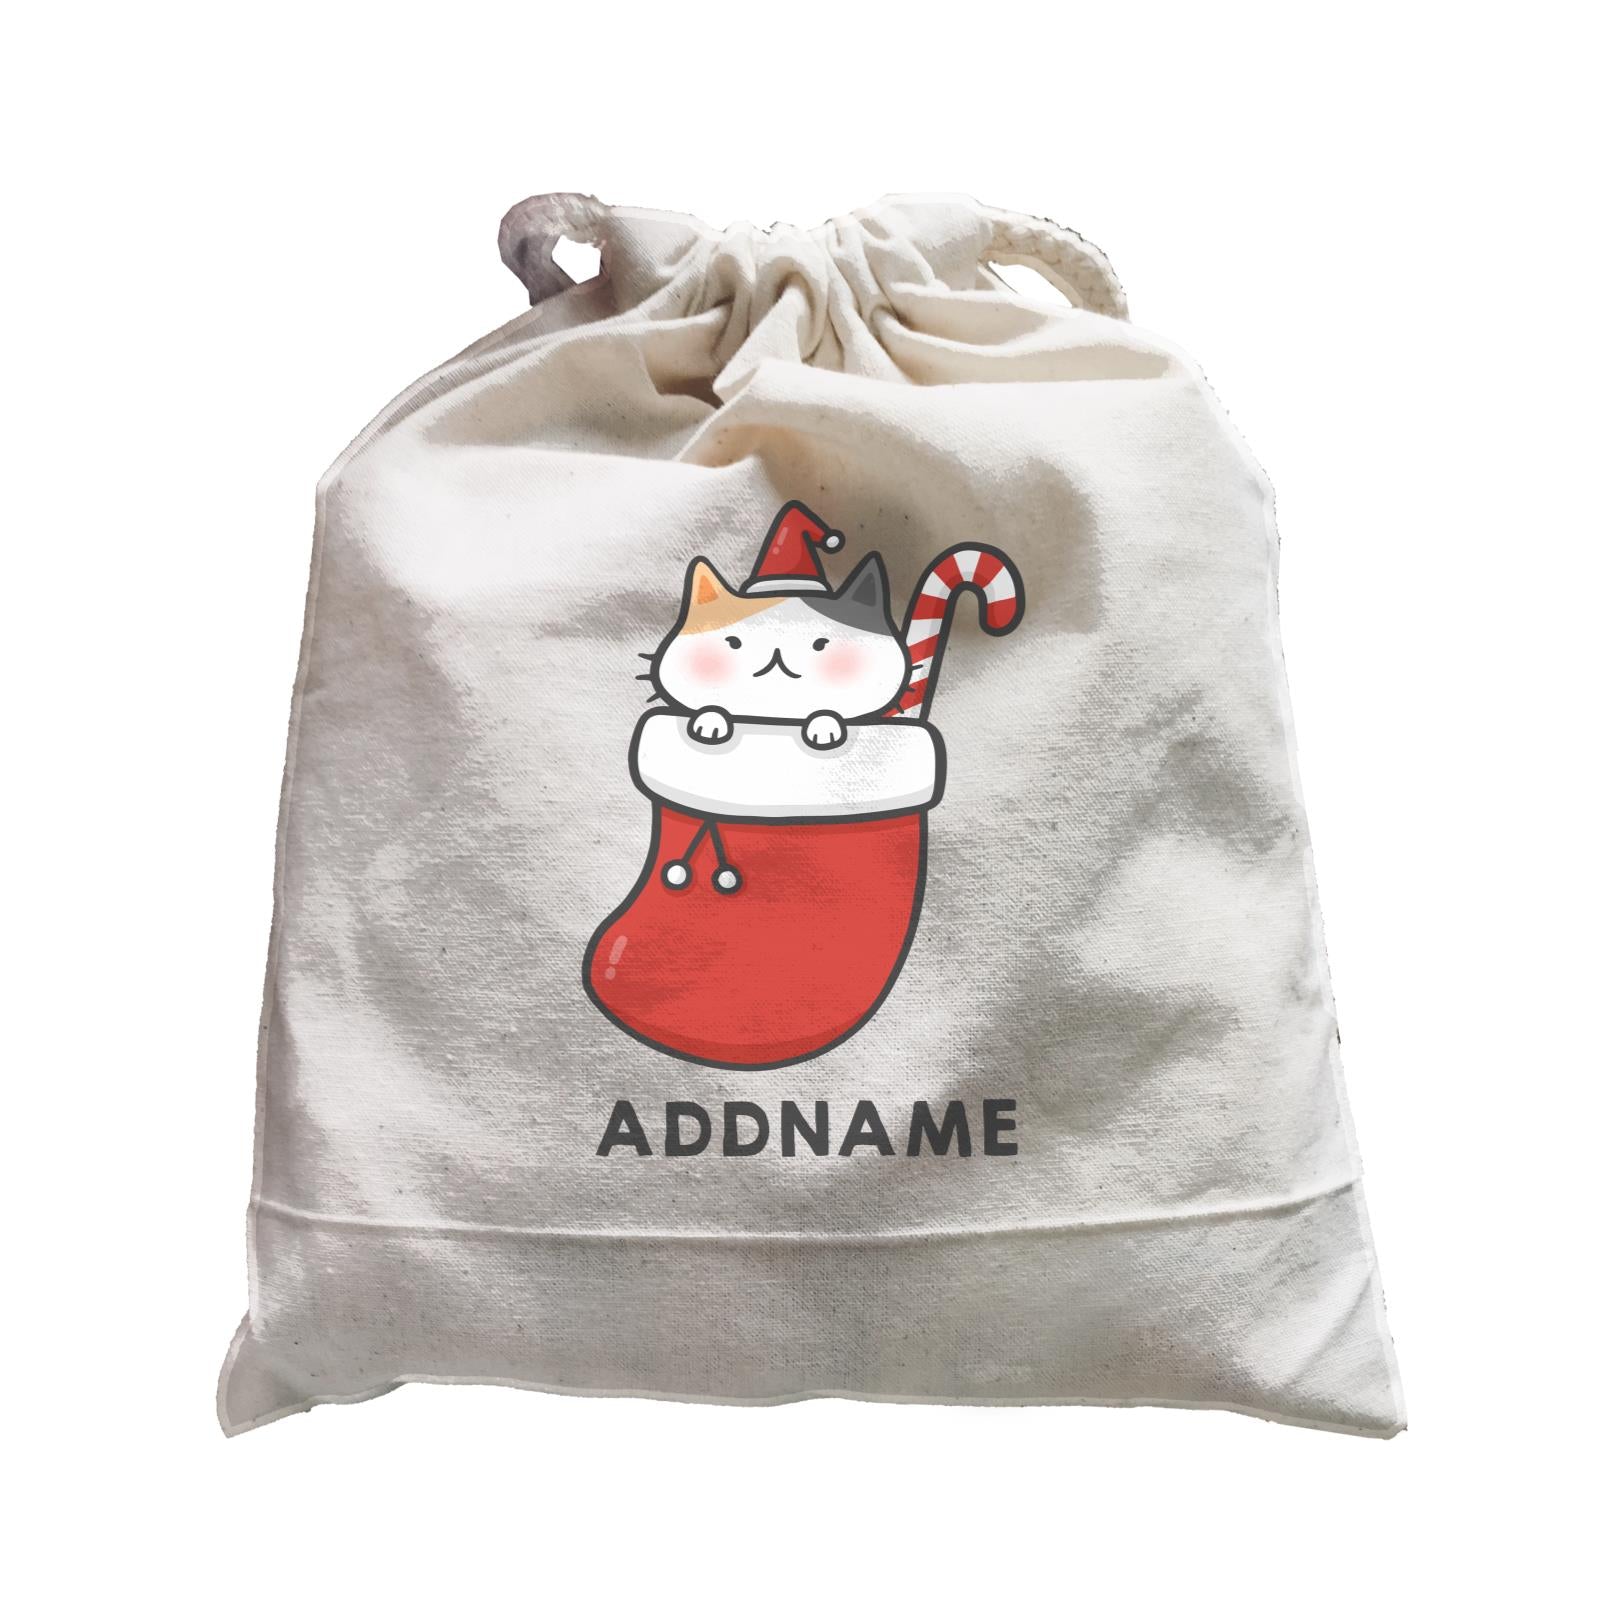 Xmas Cute Cat In Christmas Sock Addname Accessories Satchel